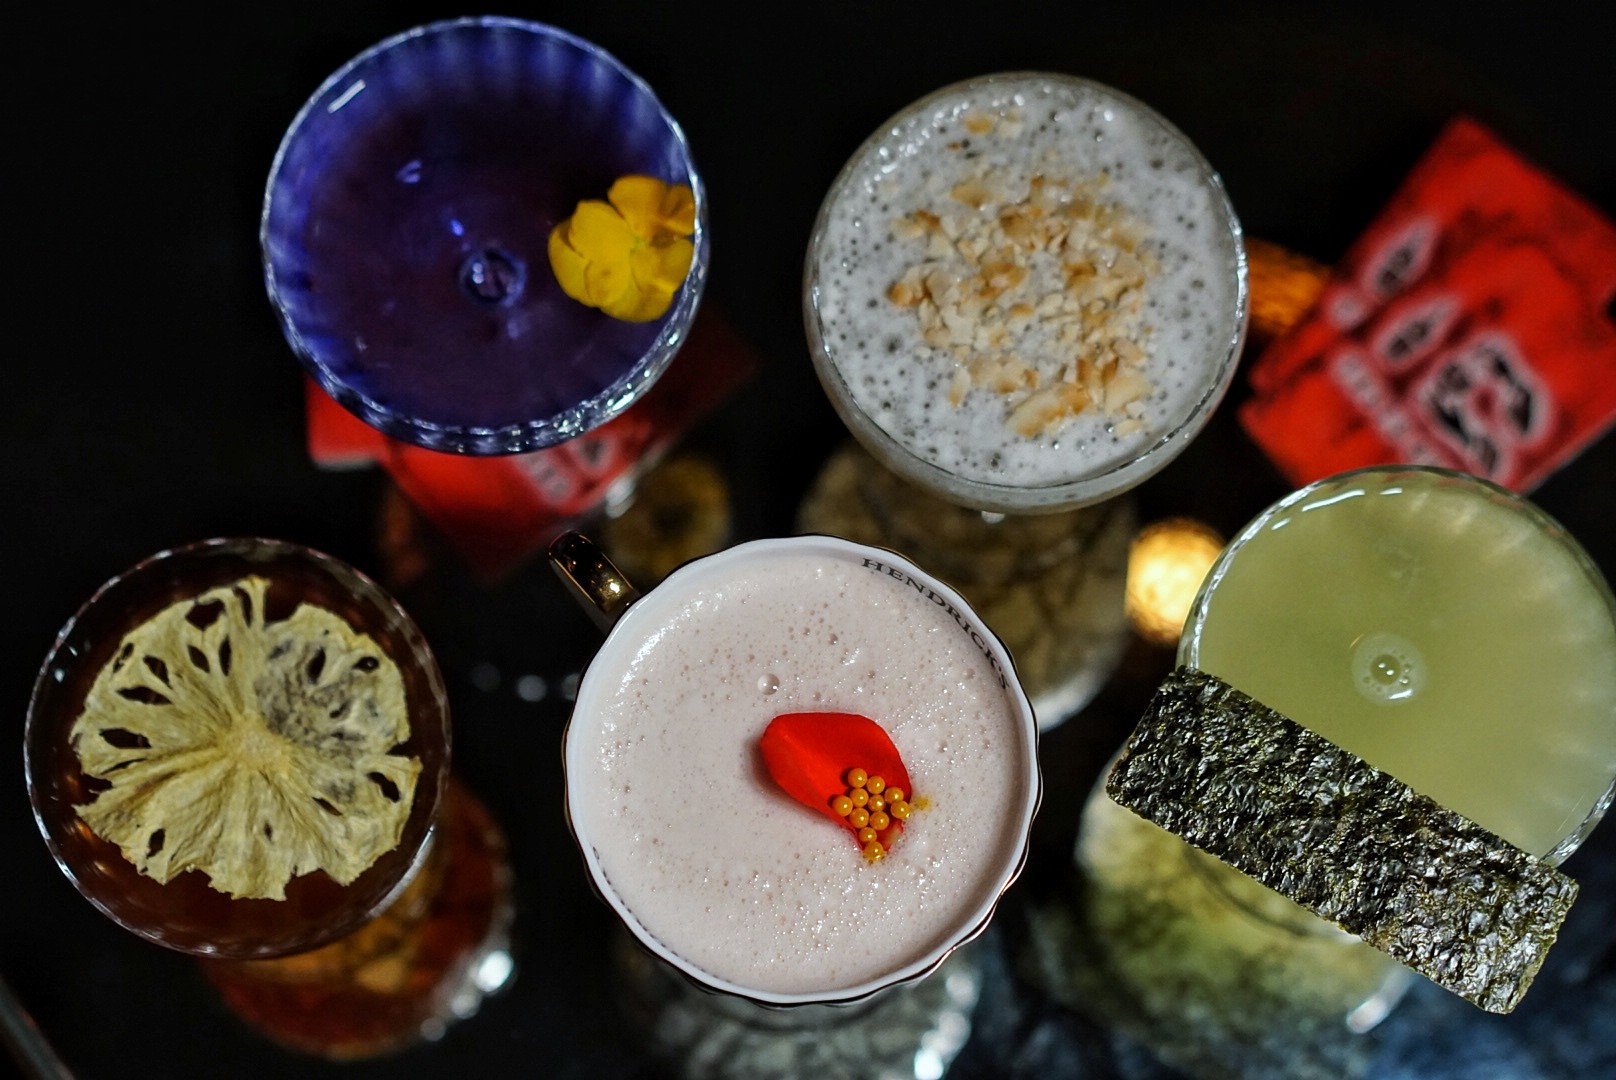 A Fortnight of Amazing Cocktails Awaits with DRiNK Fest 2020